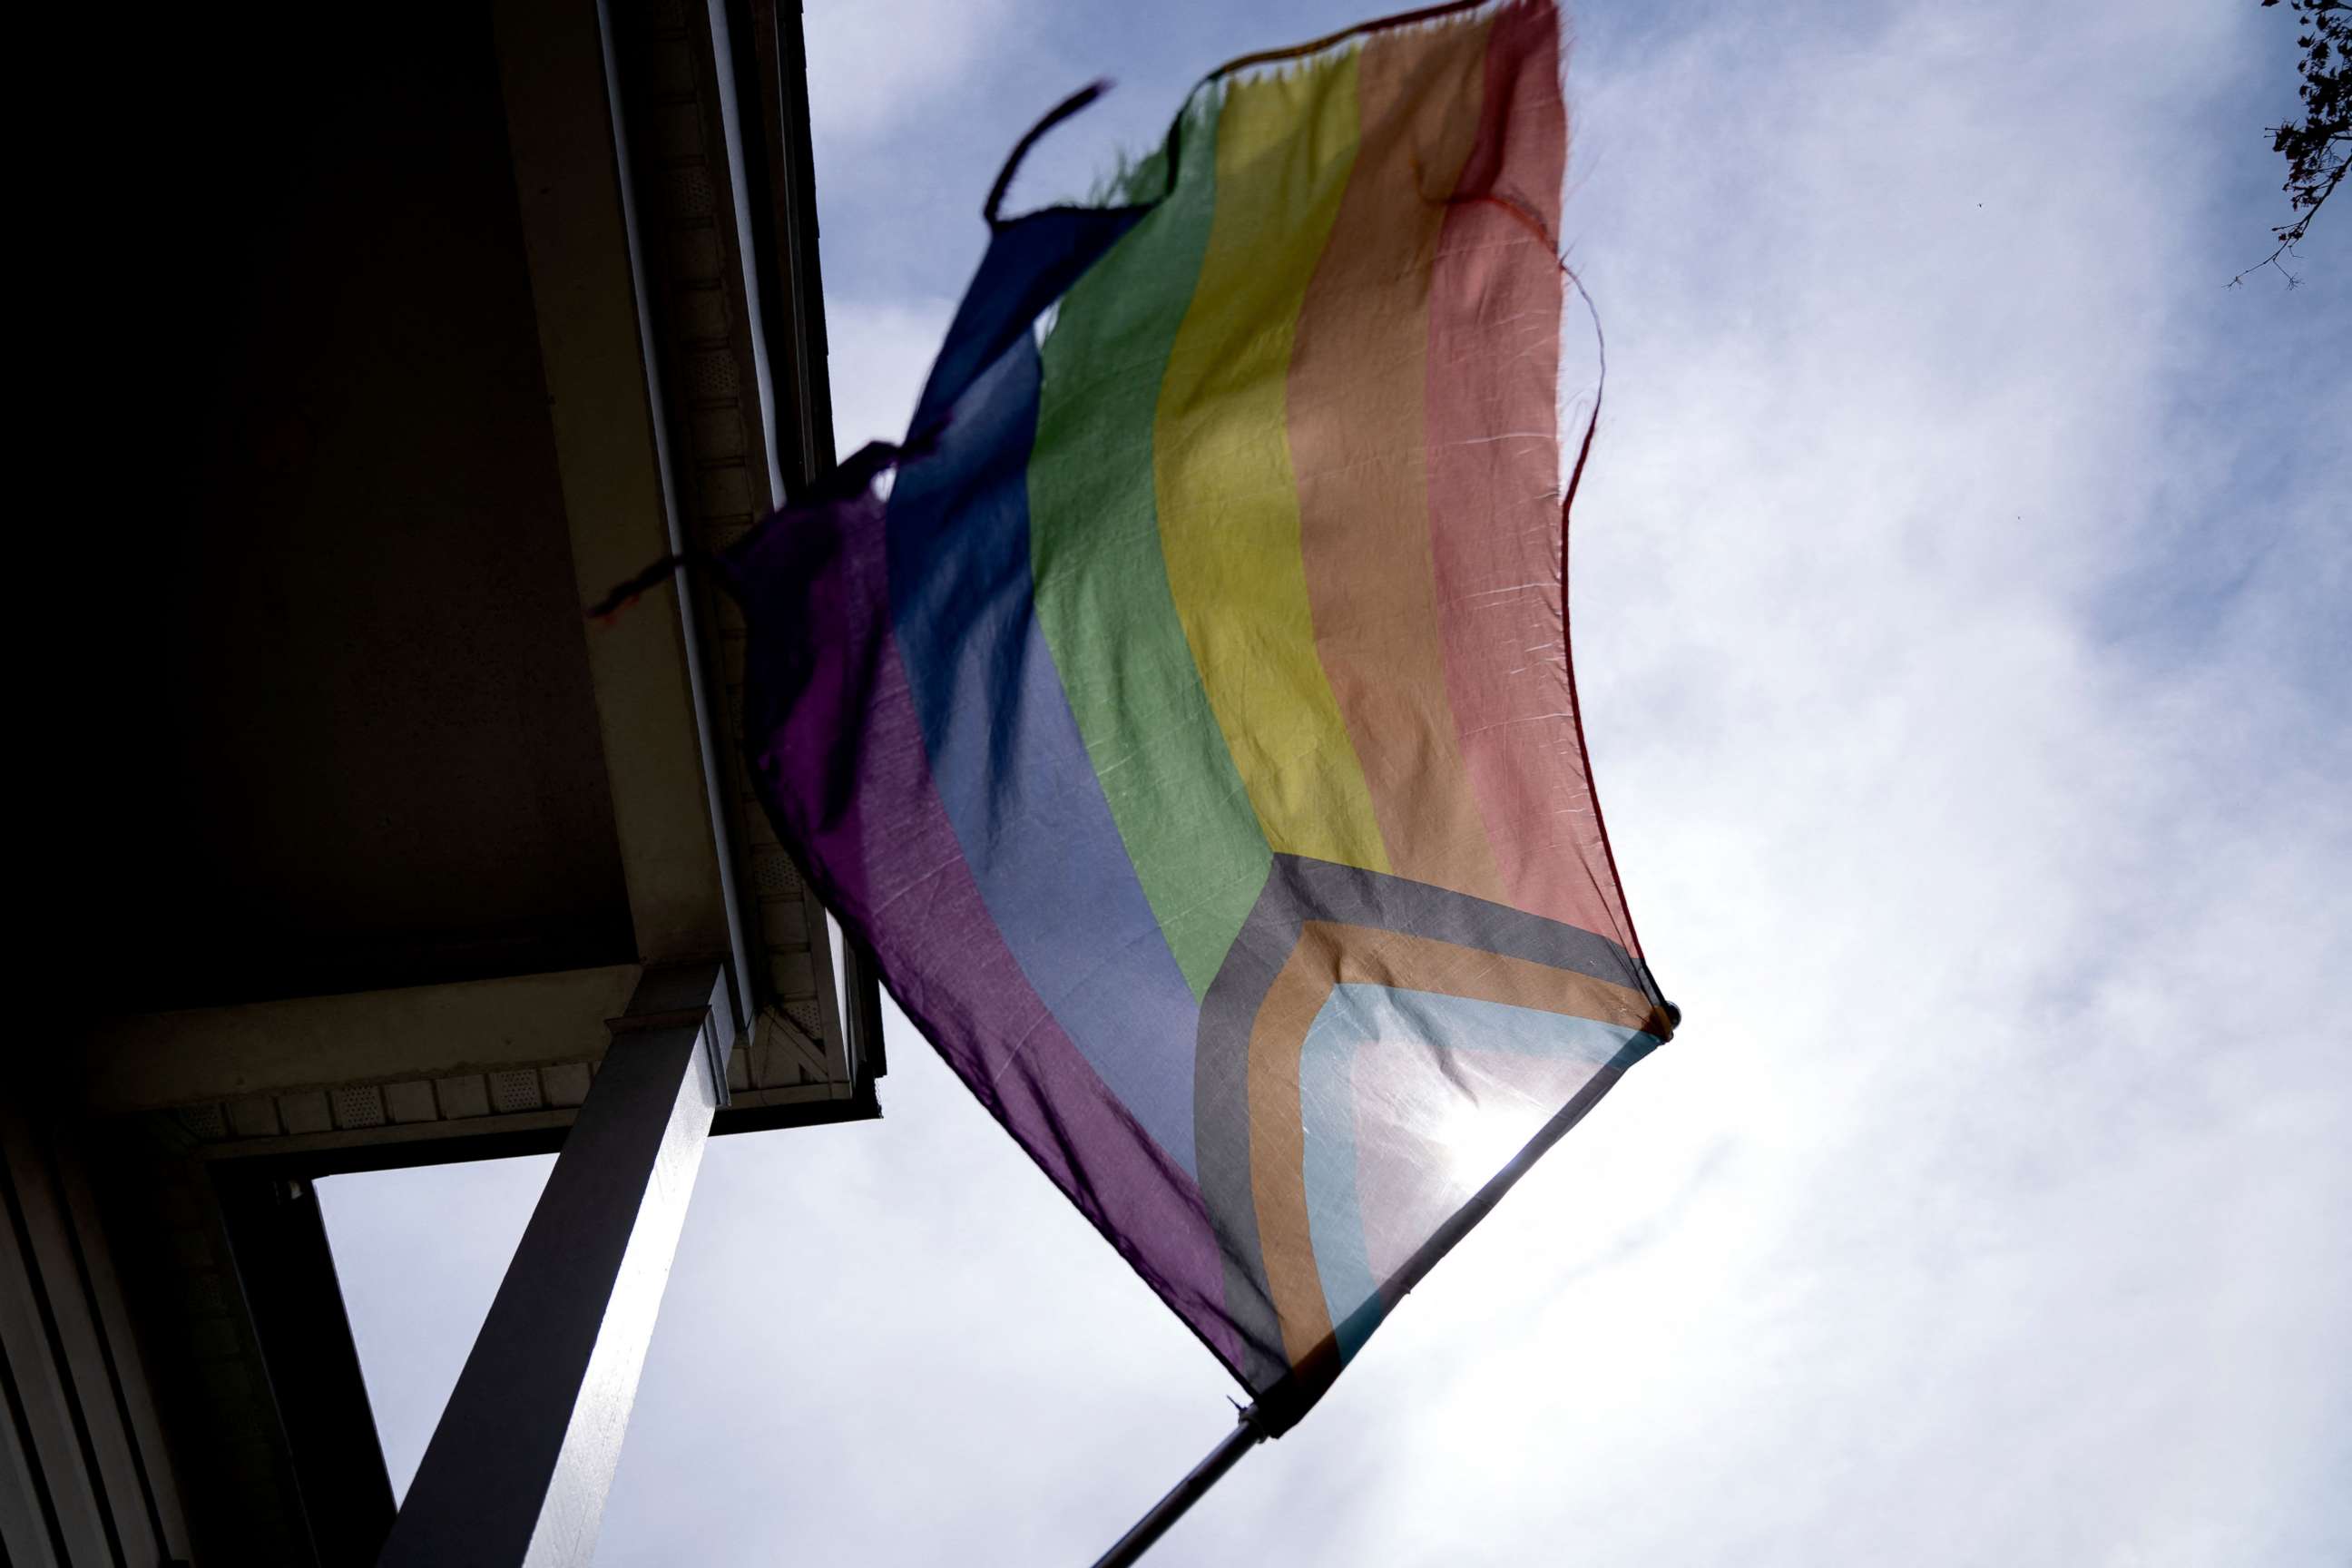 PHOTO: An LGBTQ pride flag is displayed outside a home in Alexandria, Virginia, on April 11, 2022. 